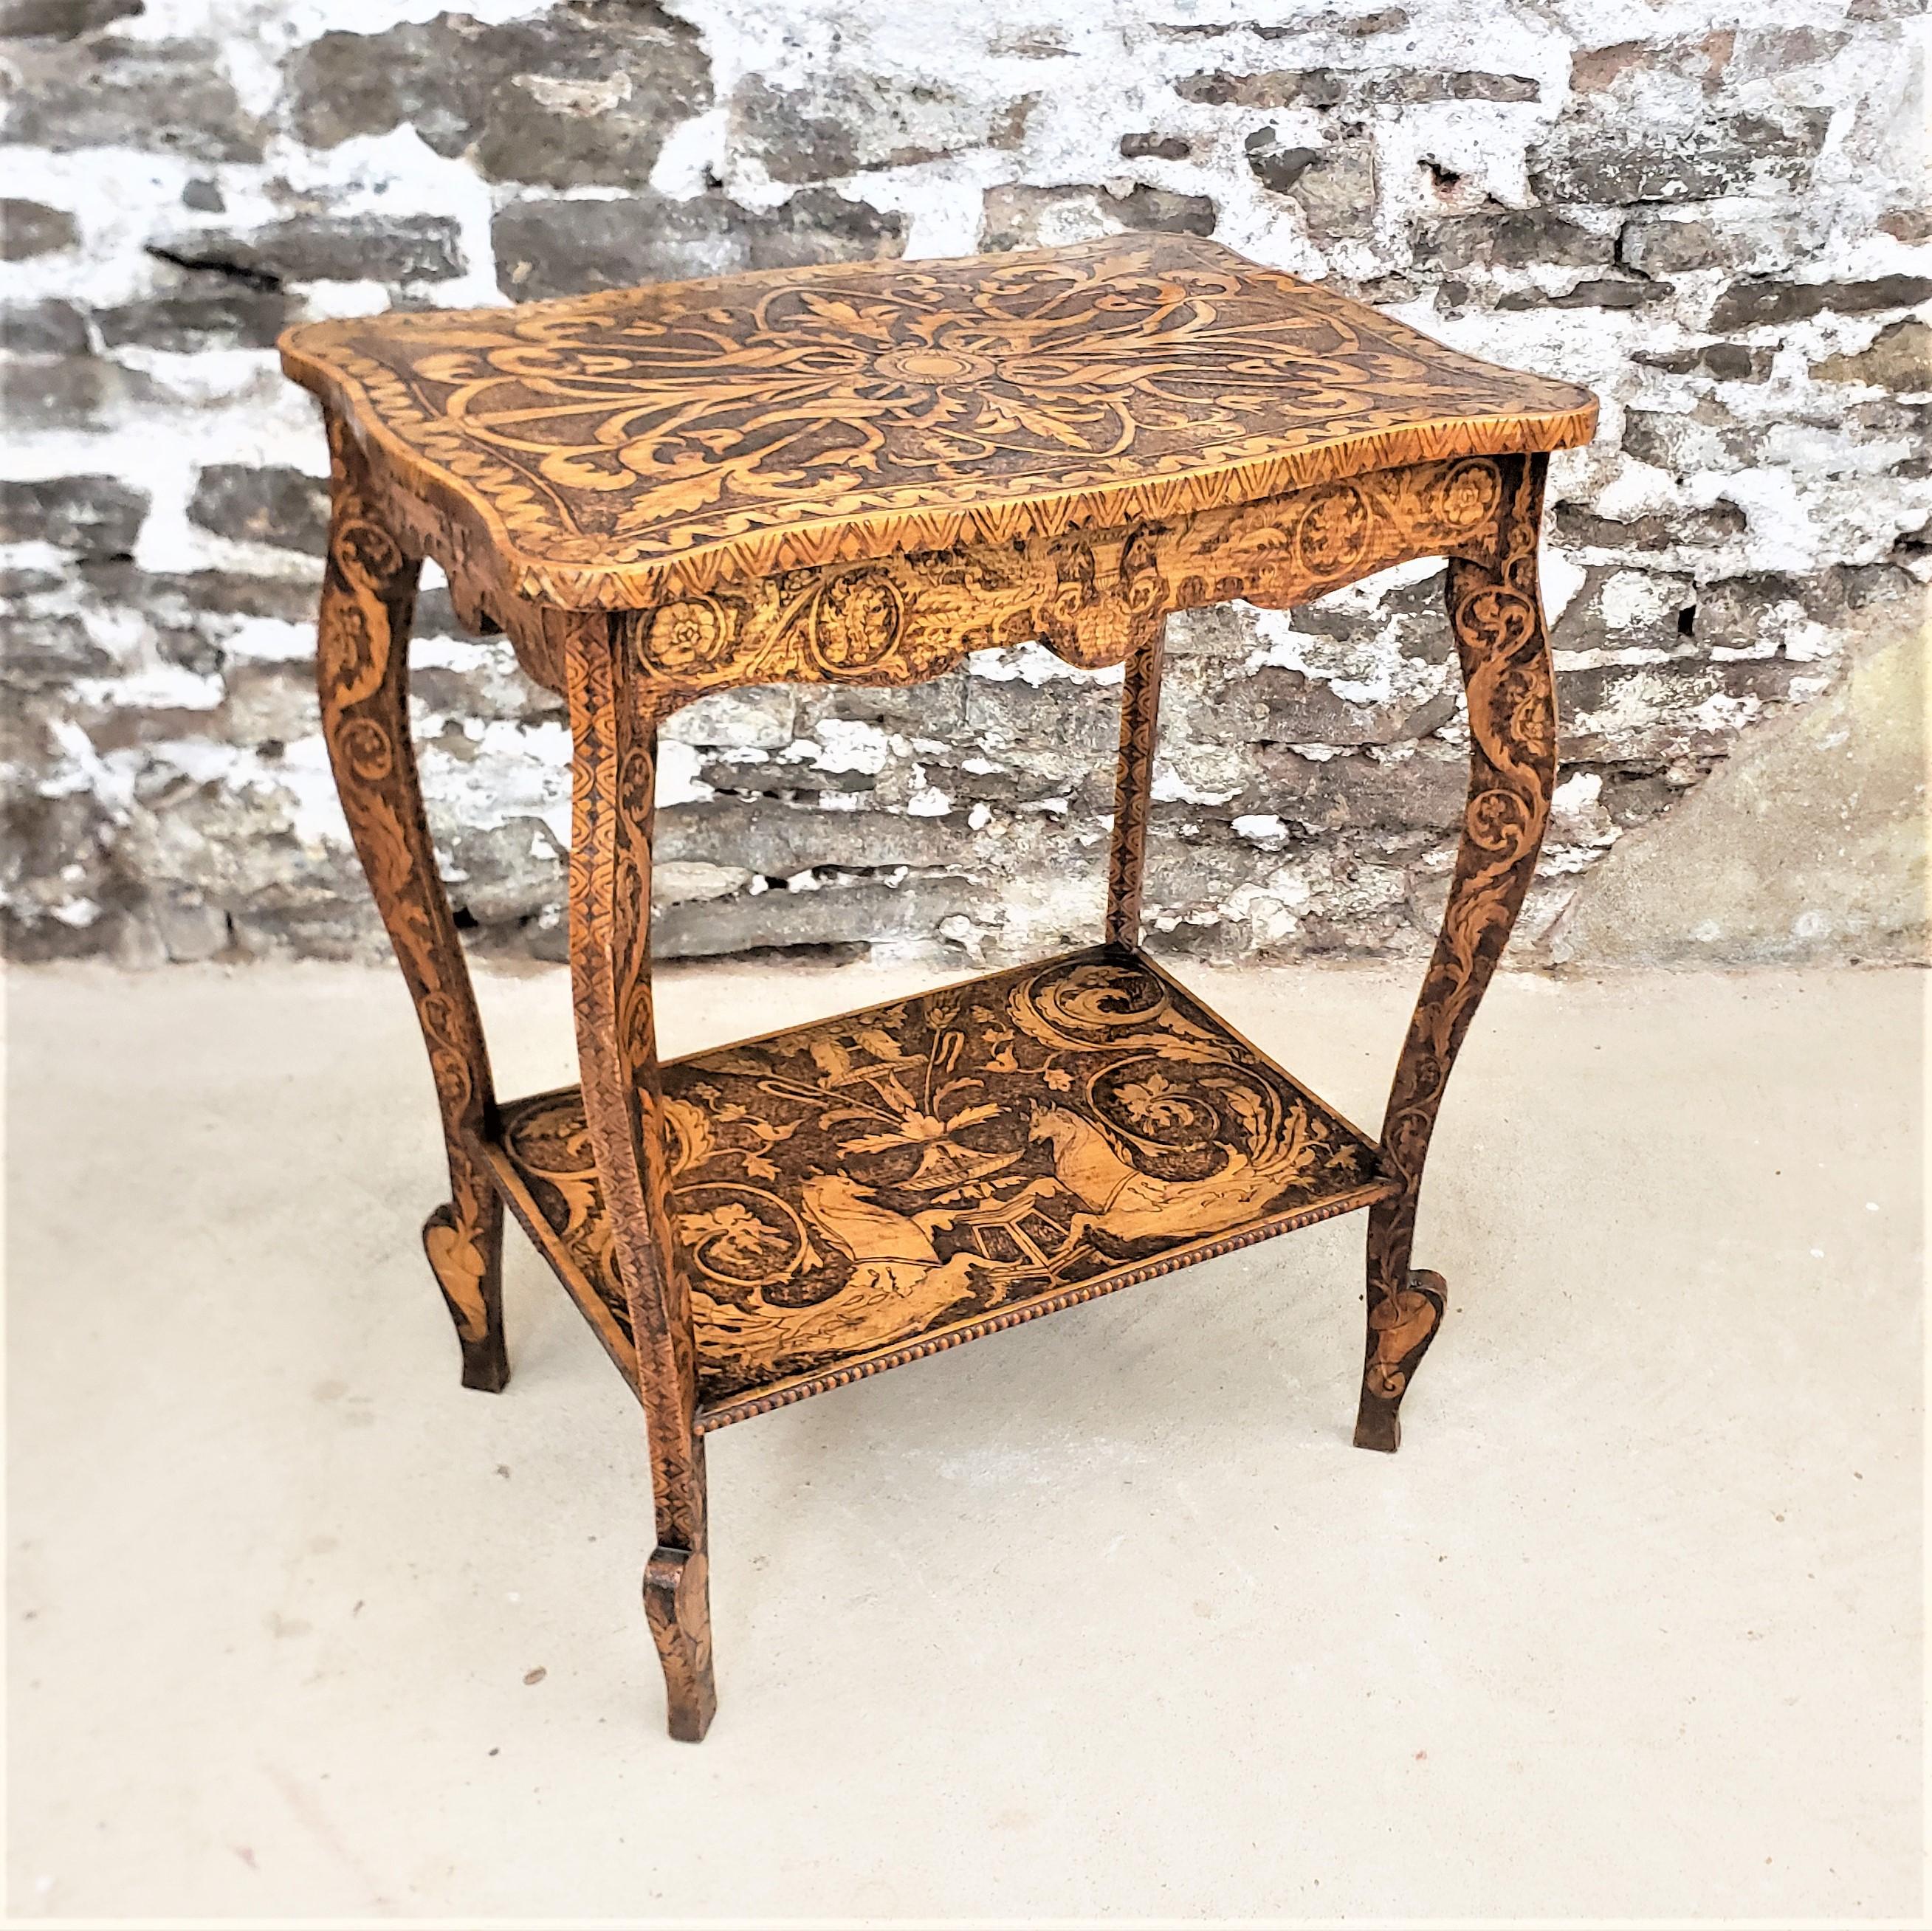 This antique Folk Art pyro decorated two tiered table is unsigned, but presumed to have been made in the United States in approximately 1900 in the period Folk Art style. The entire table, including the skirt and the sides of the legs in addition to